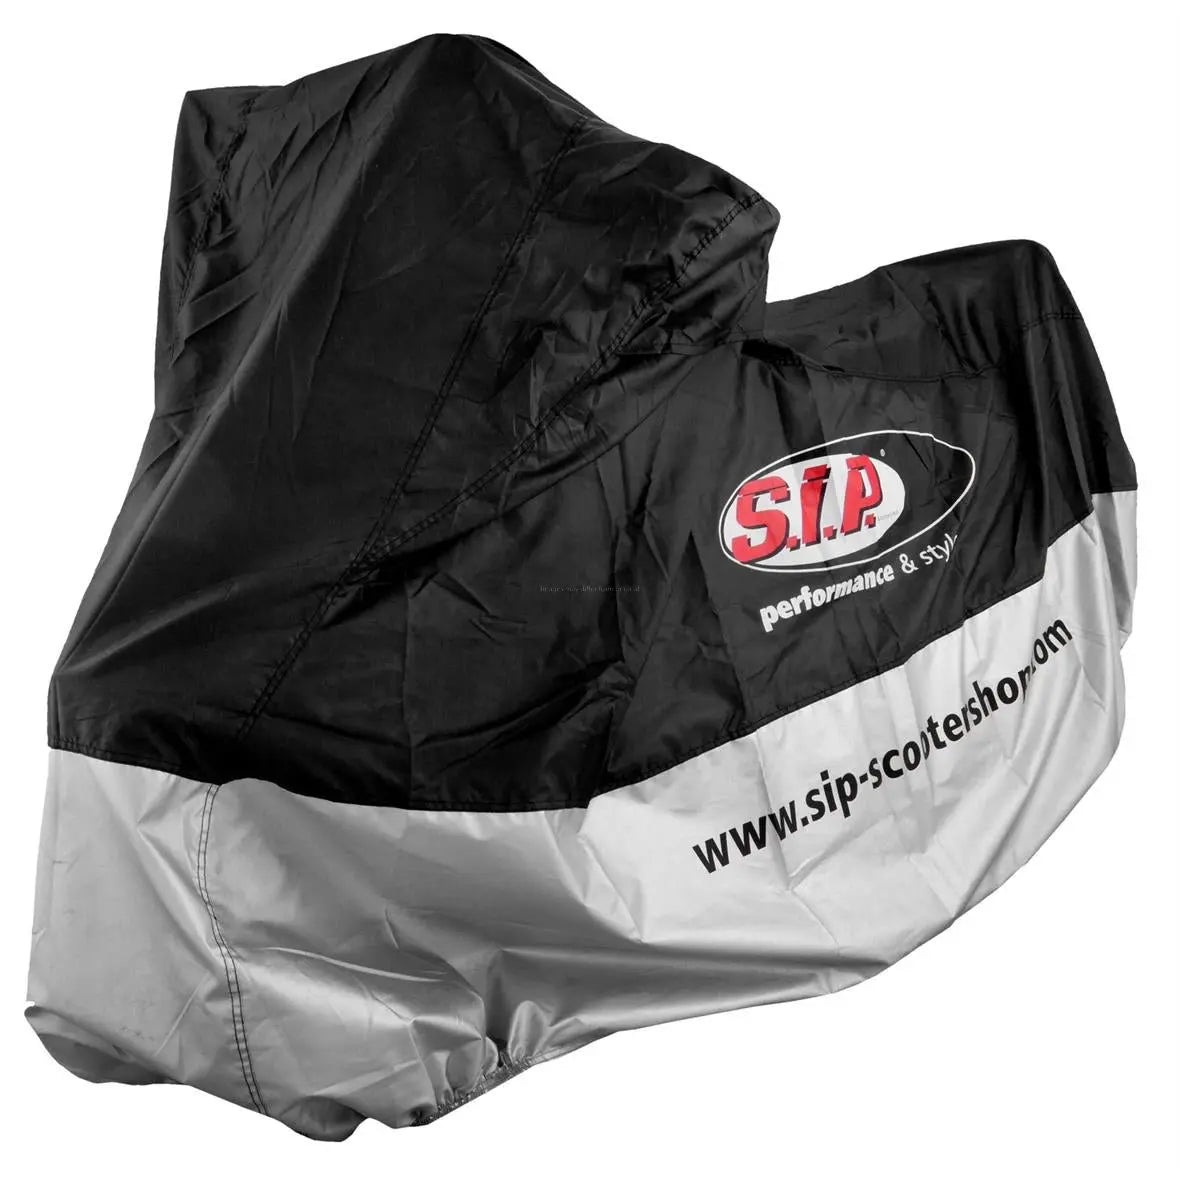 Cover SIP Outdoor "Scooter" | size M-L 2050x840x1210 mm black/silver – Falan